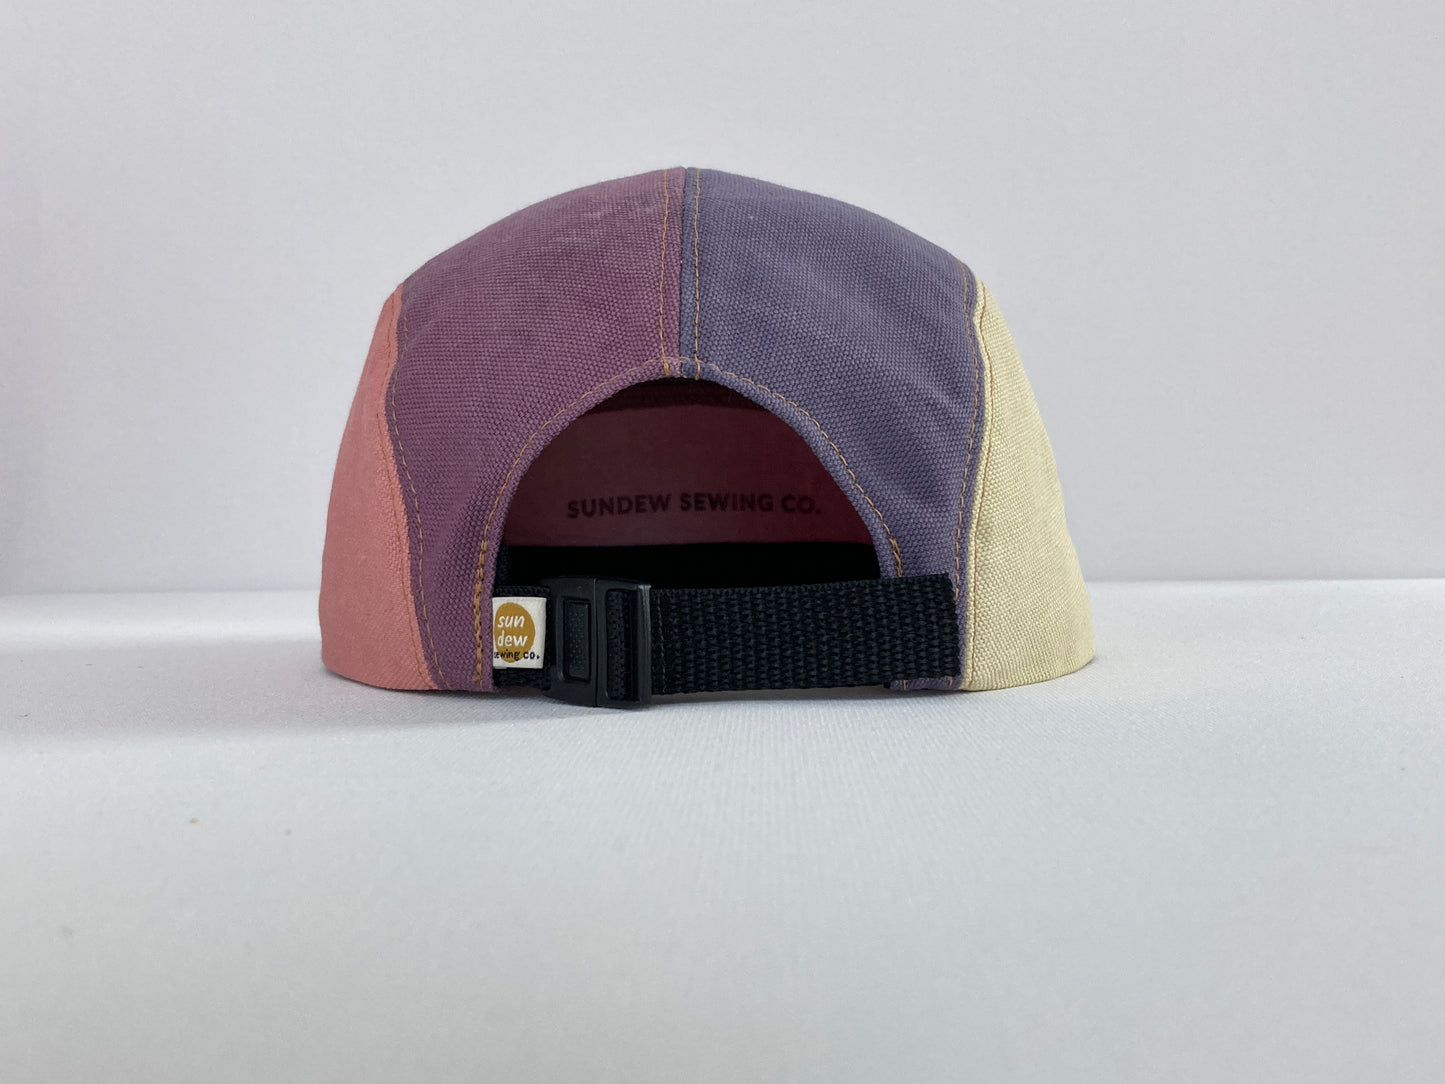 Naturally Dyed Camp Hat - Rainbow Color Block